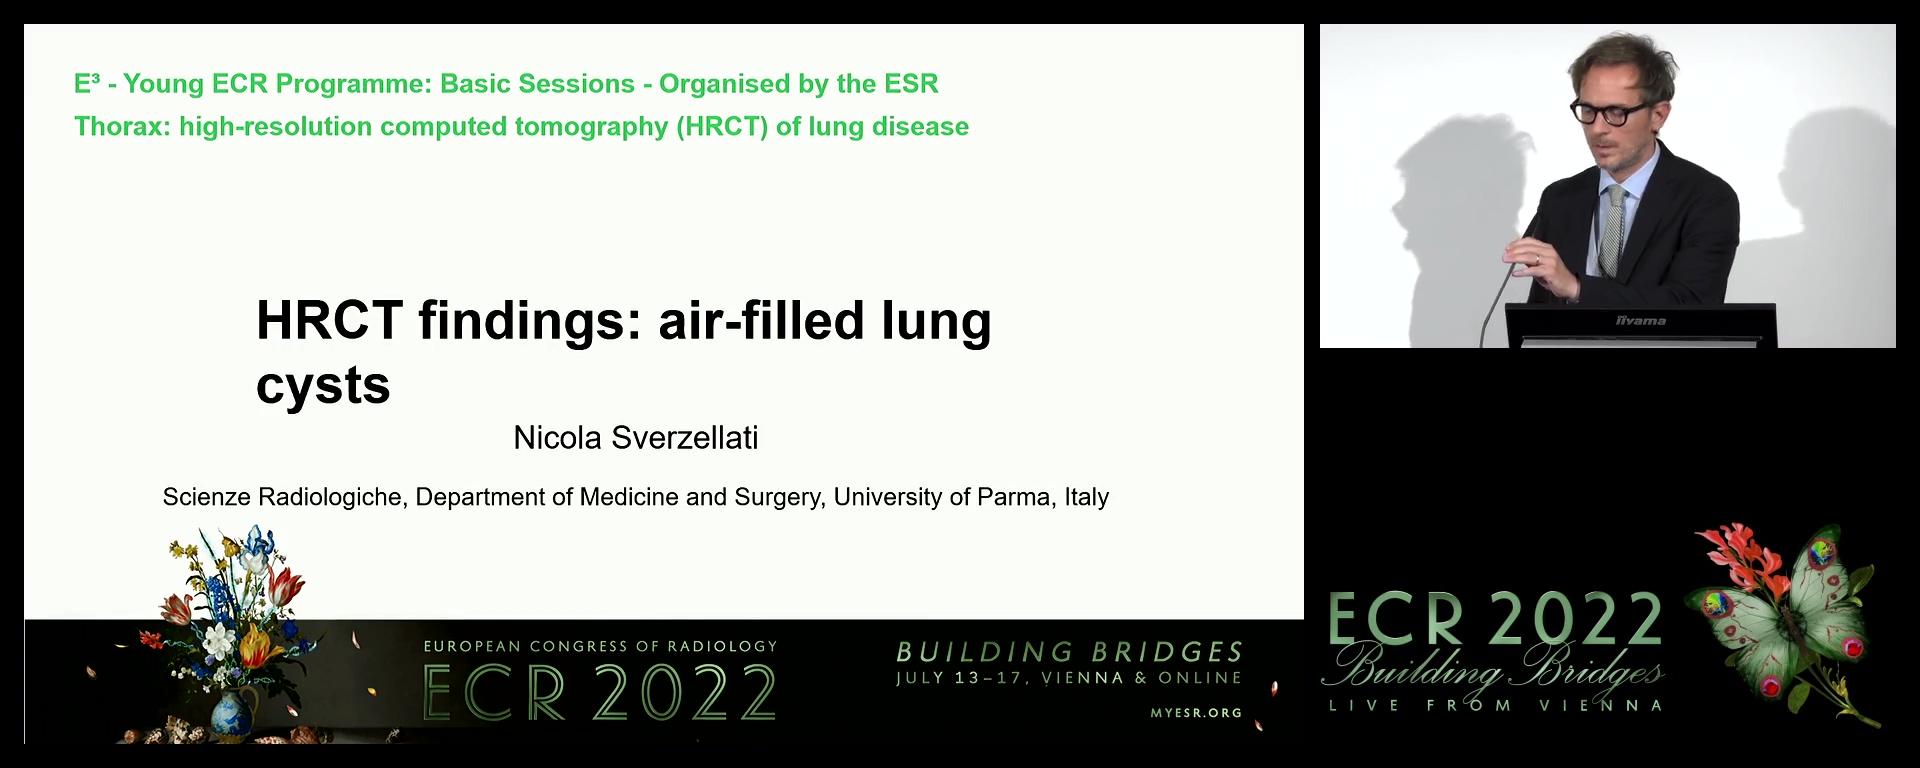 HRCT findings: air-filled lung cysts - Nicola Sverzellati, Parma / IT